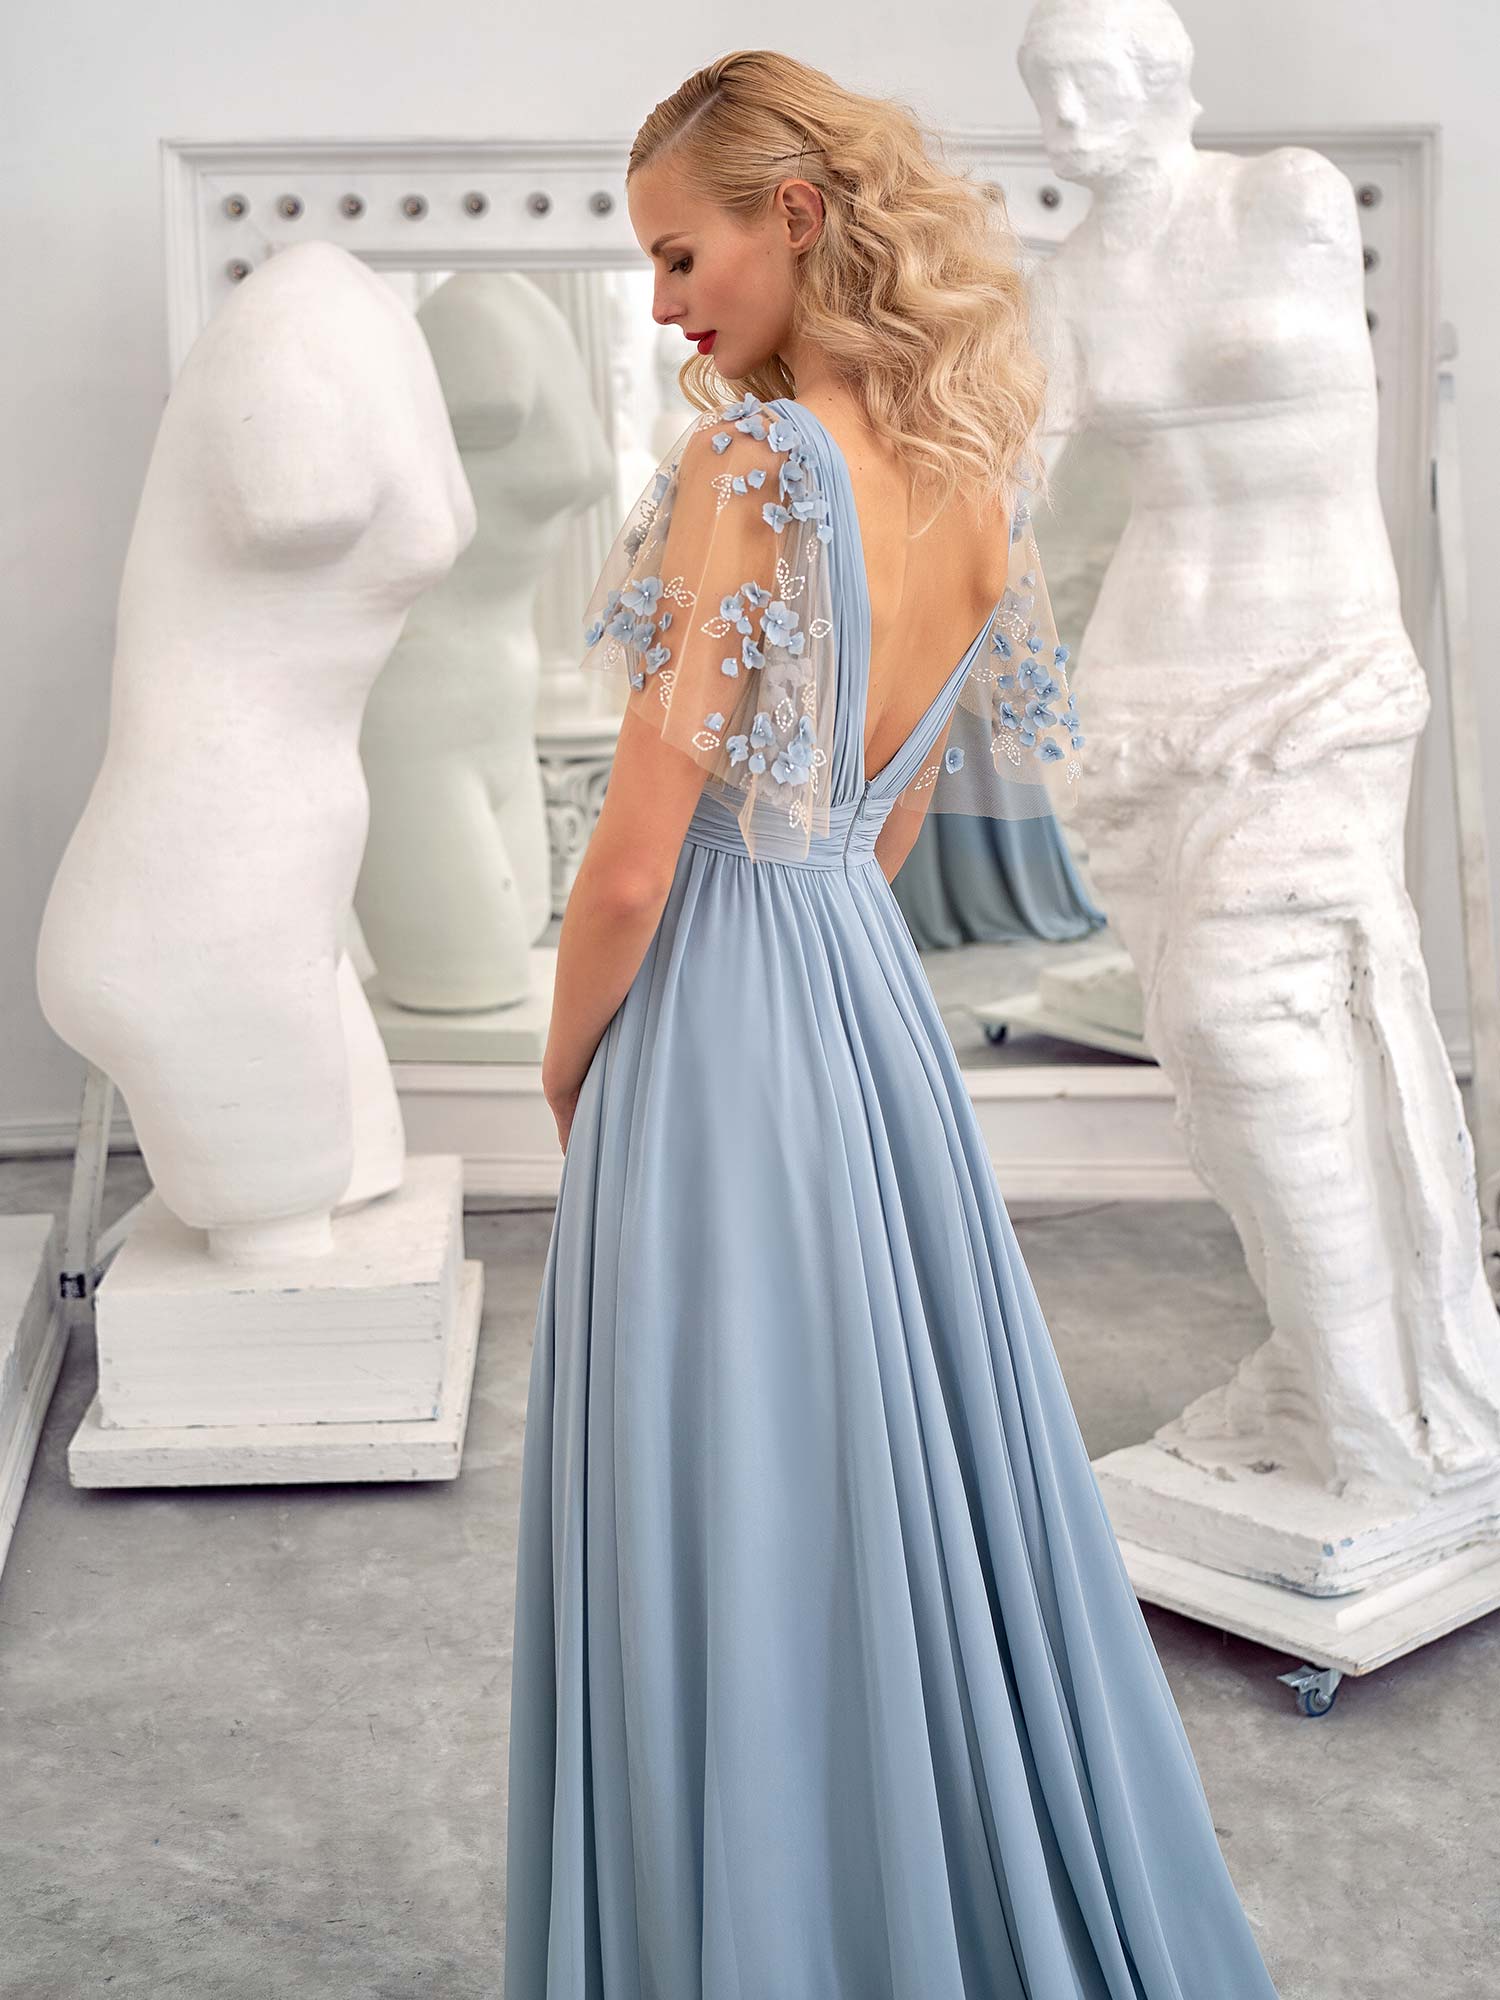 Style #636, sheath evening gown with V-neck and flutter sleeves; available in ivory, cherry, blue, azure, yellow, black, green